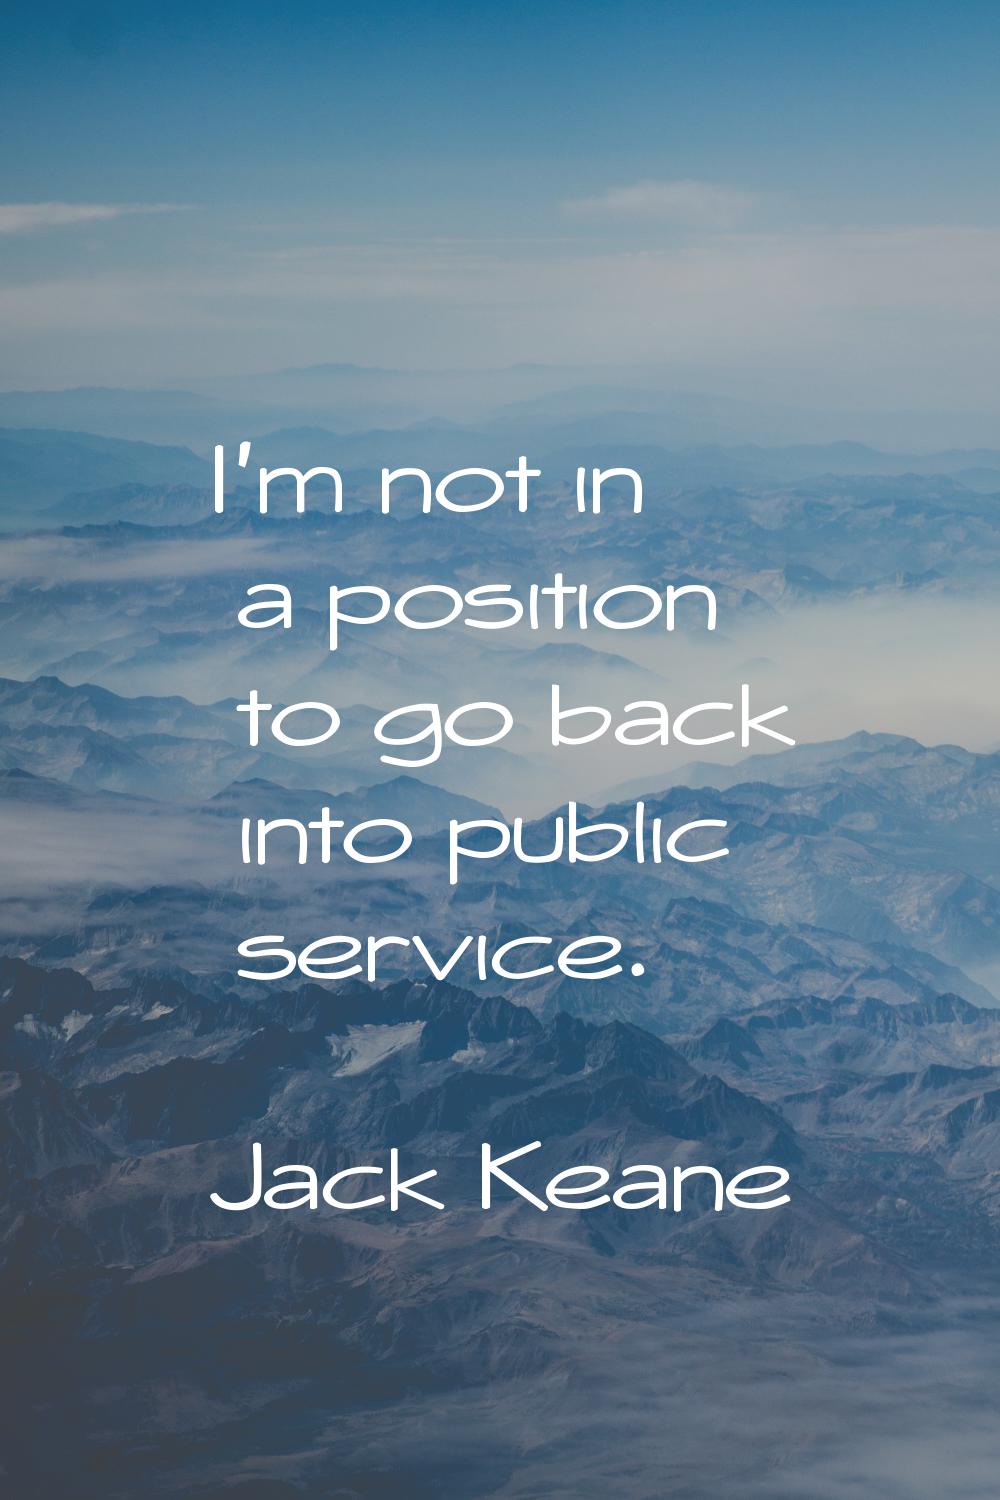 I'm not in a position to go back into public service.